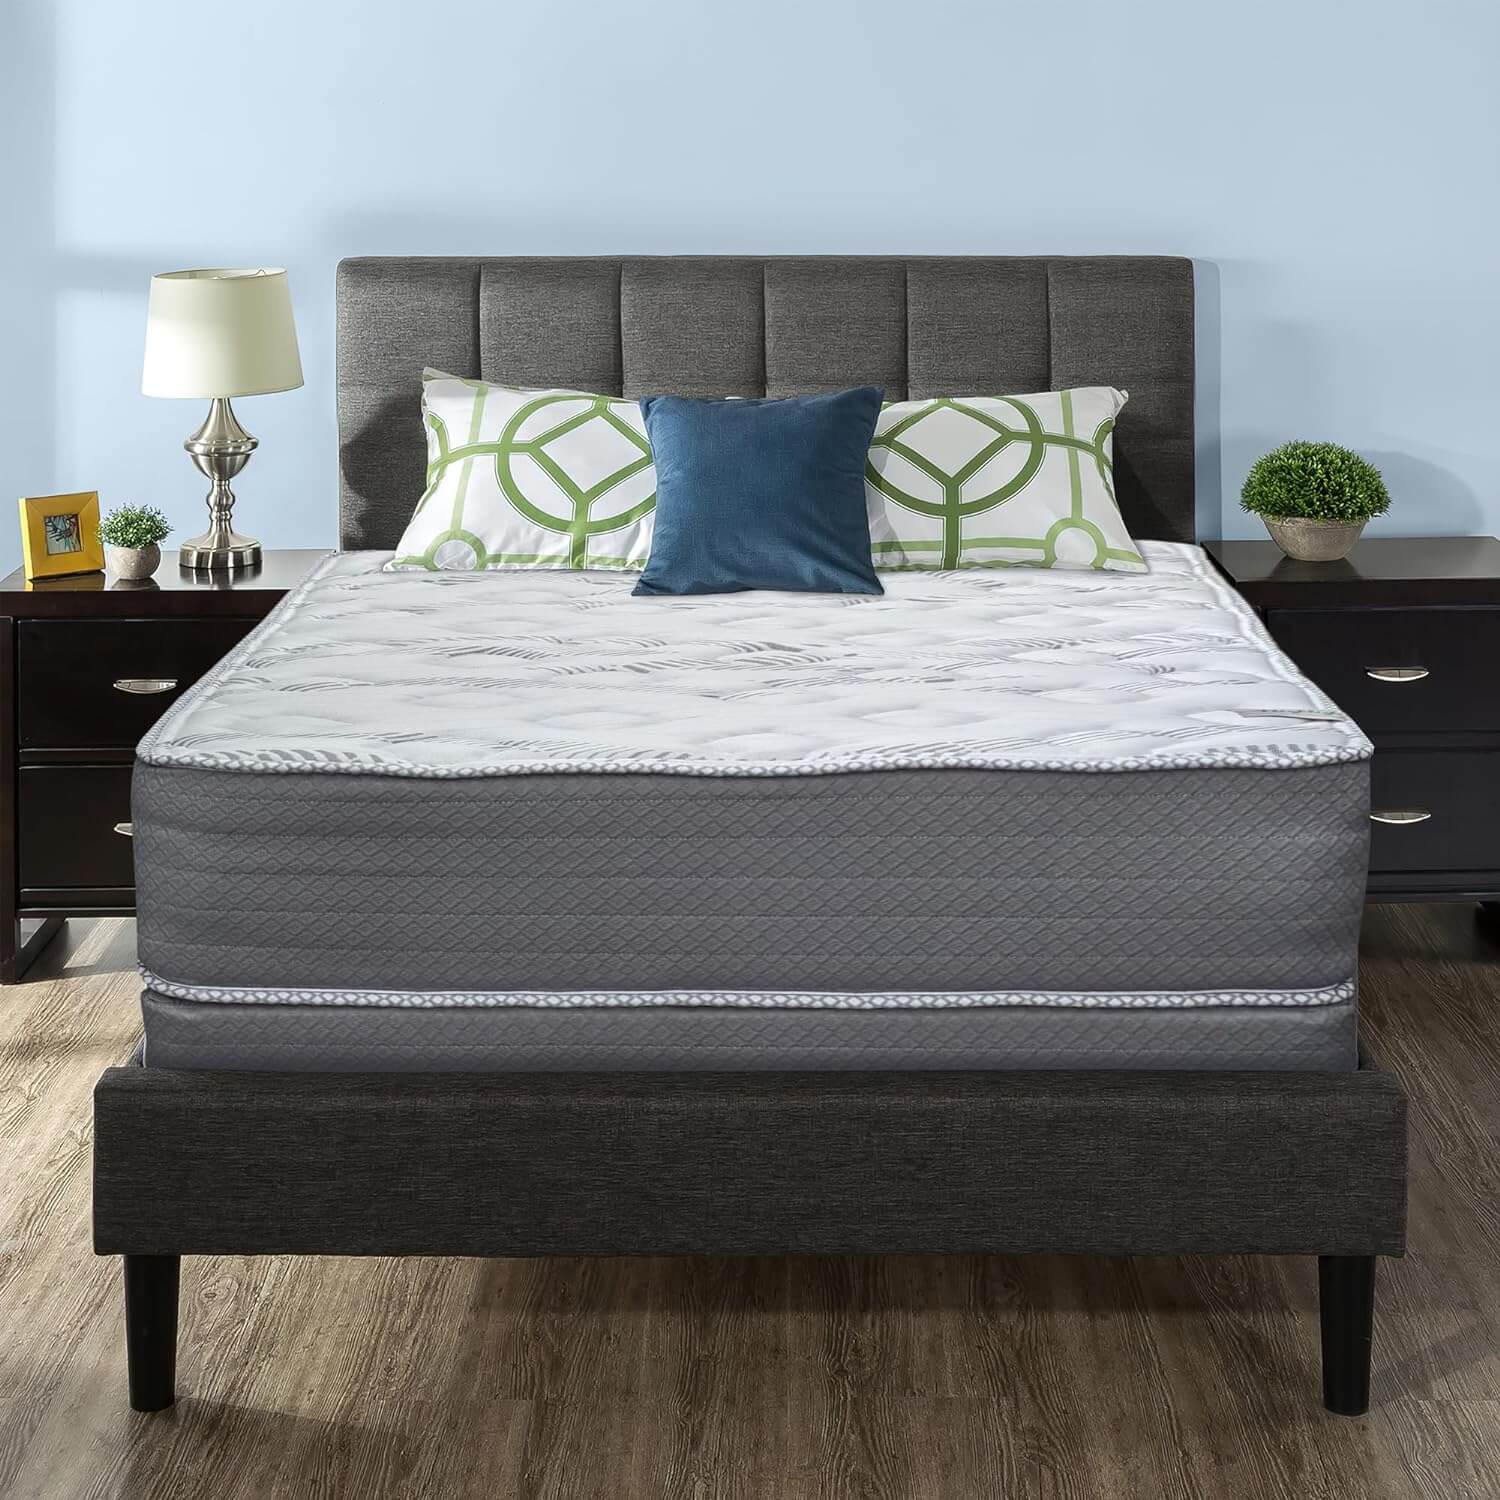 Nutan Firm Double-sided Tight top Innerspring Fully Assembled Mattress